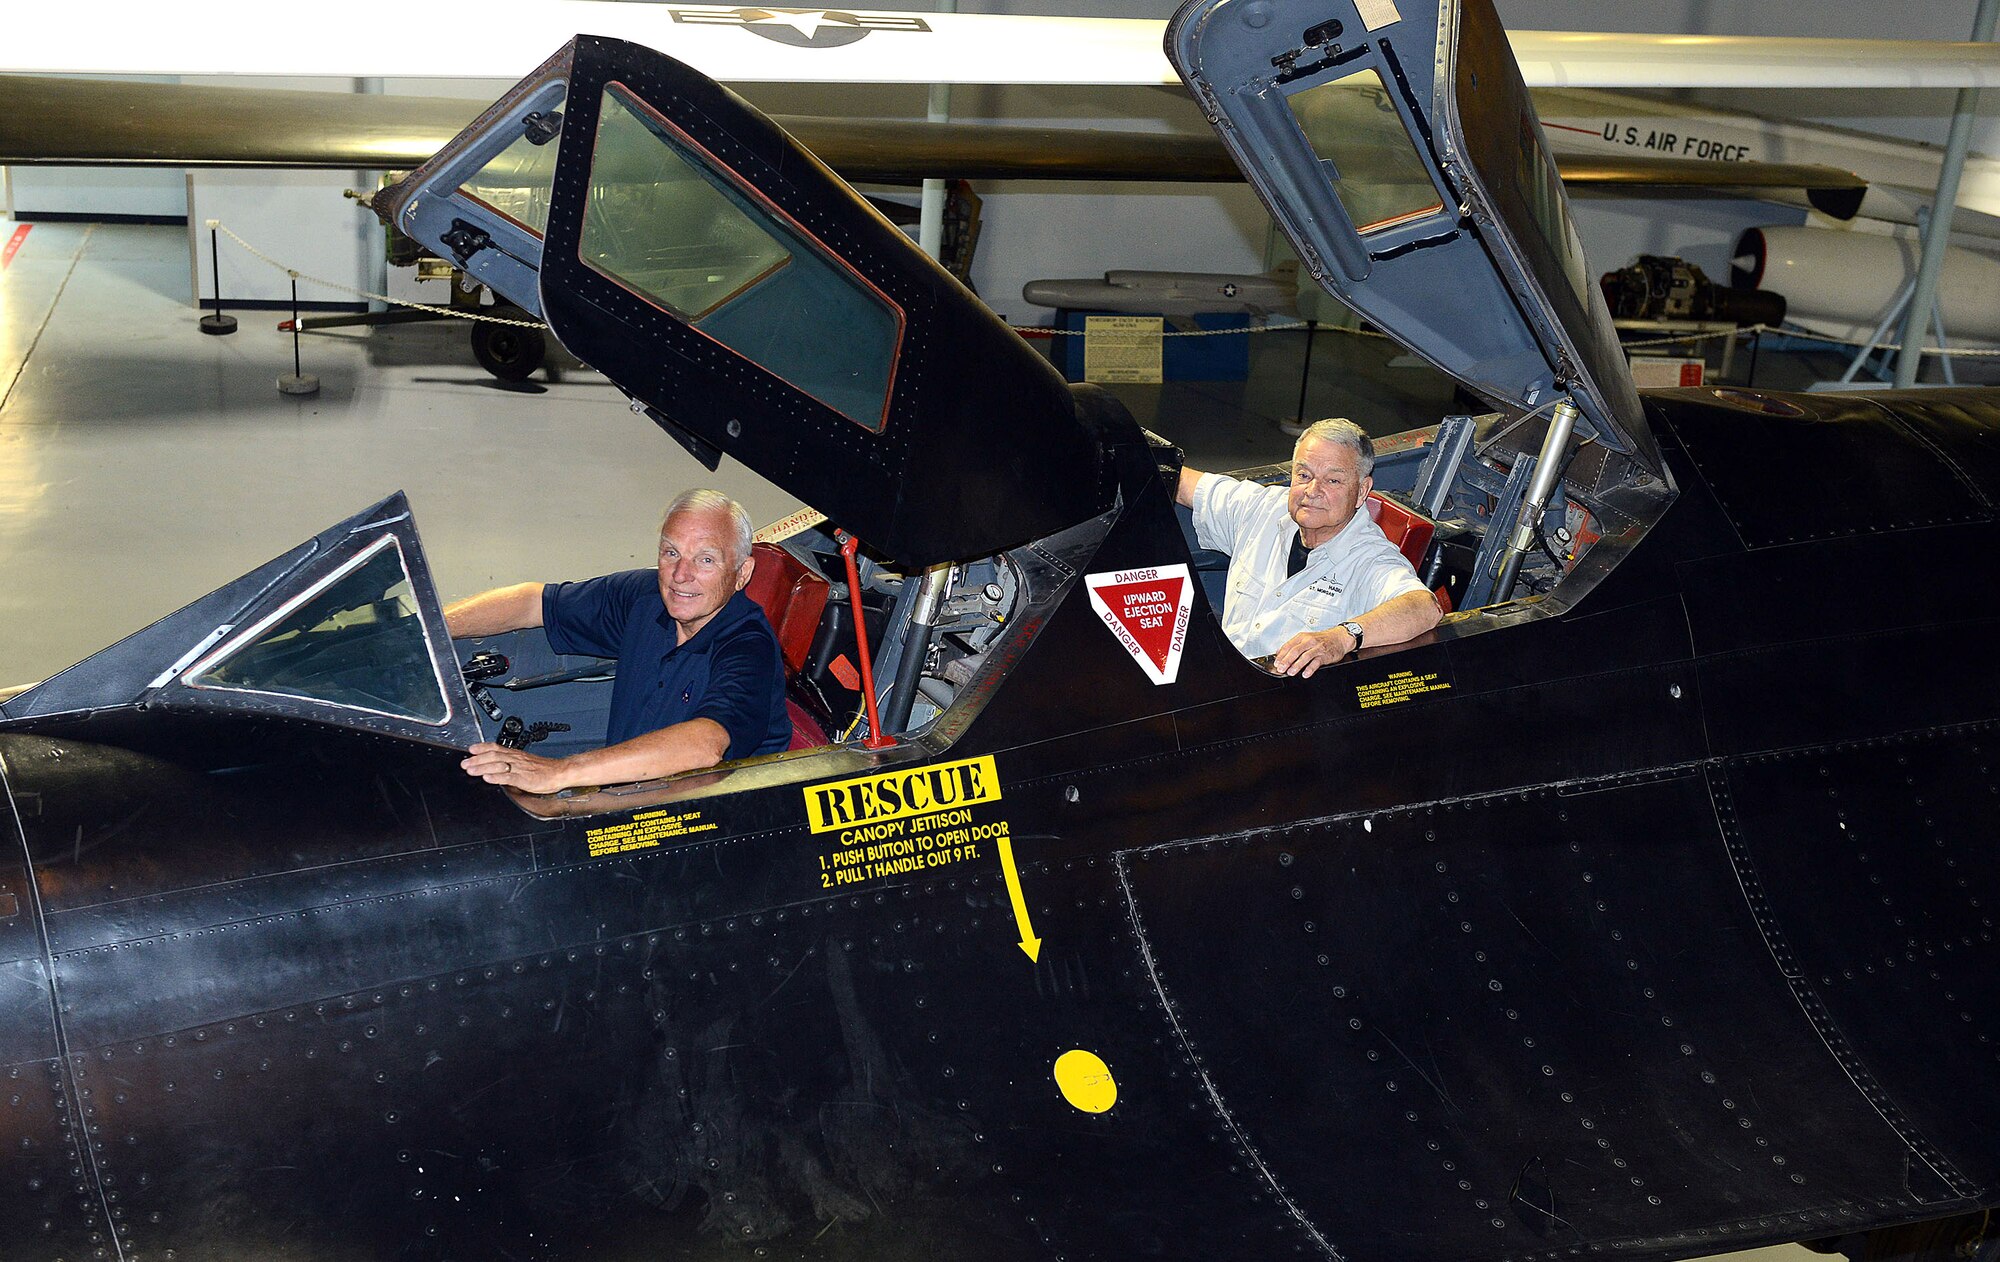 Retired Maj. Gen. Eldon Joersz, a former pilot, and retired Lt. Col. George Morgan, a former reconnaissance systems officer, sit inside the cockpit of the SR-71 Blackbird they flew when setting the world absolute speed record for jet-powered aircraft July 28, 1976. The two were at the Museum of Aviation in Warner Robins, Georgia, for the 40th anniversary of the historic flight. (U.S. Air Force photo/Tommie Horton)